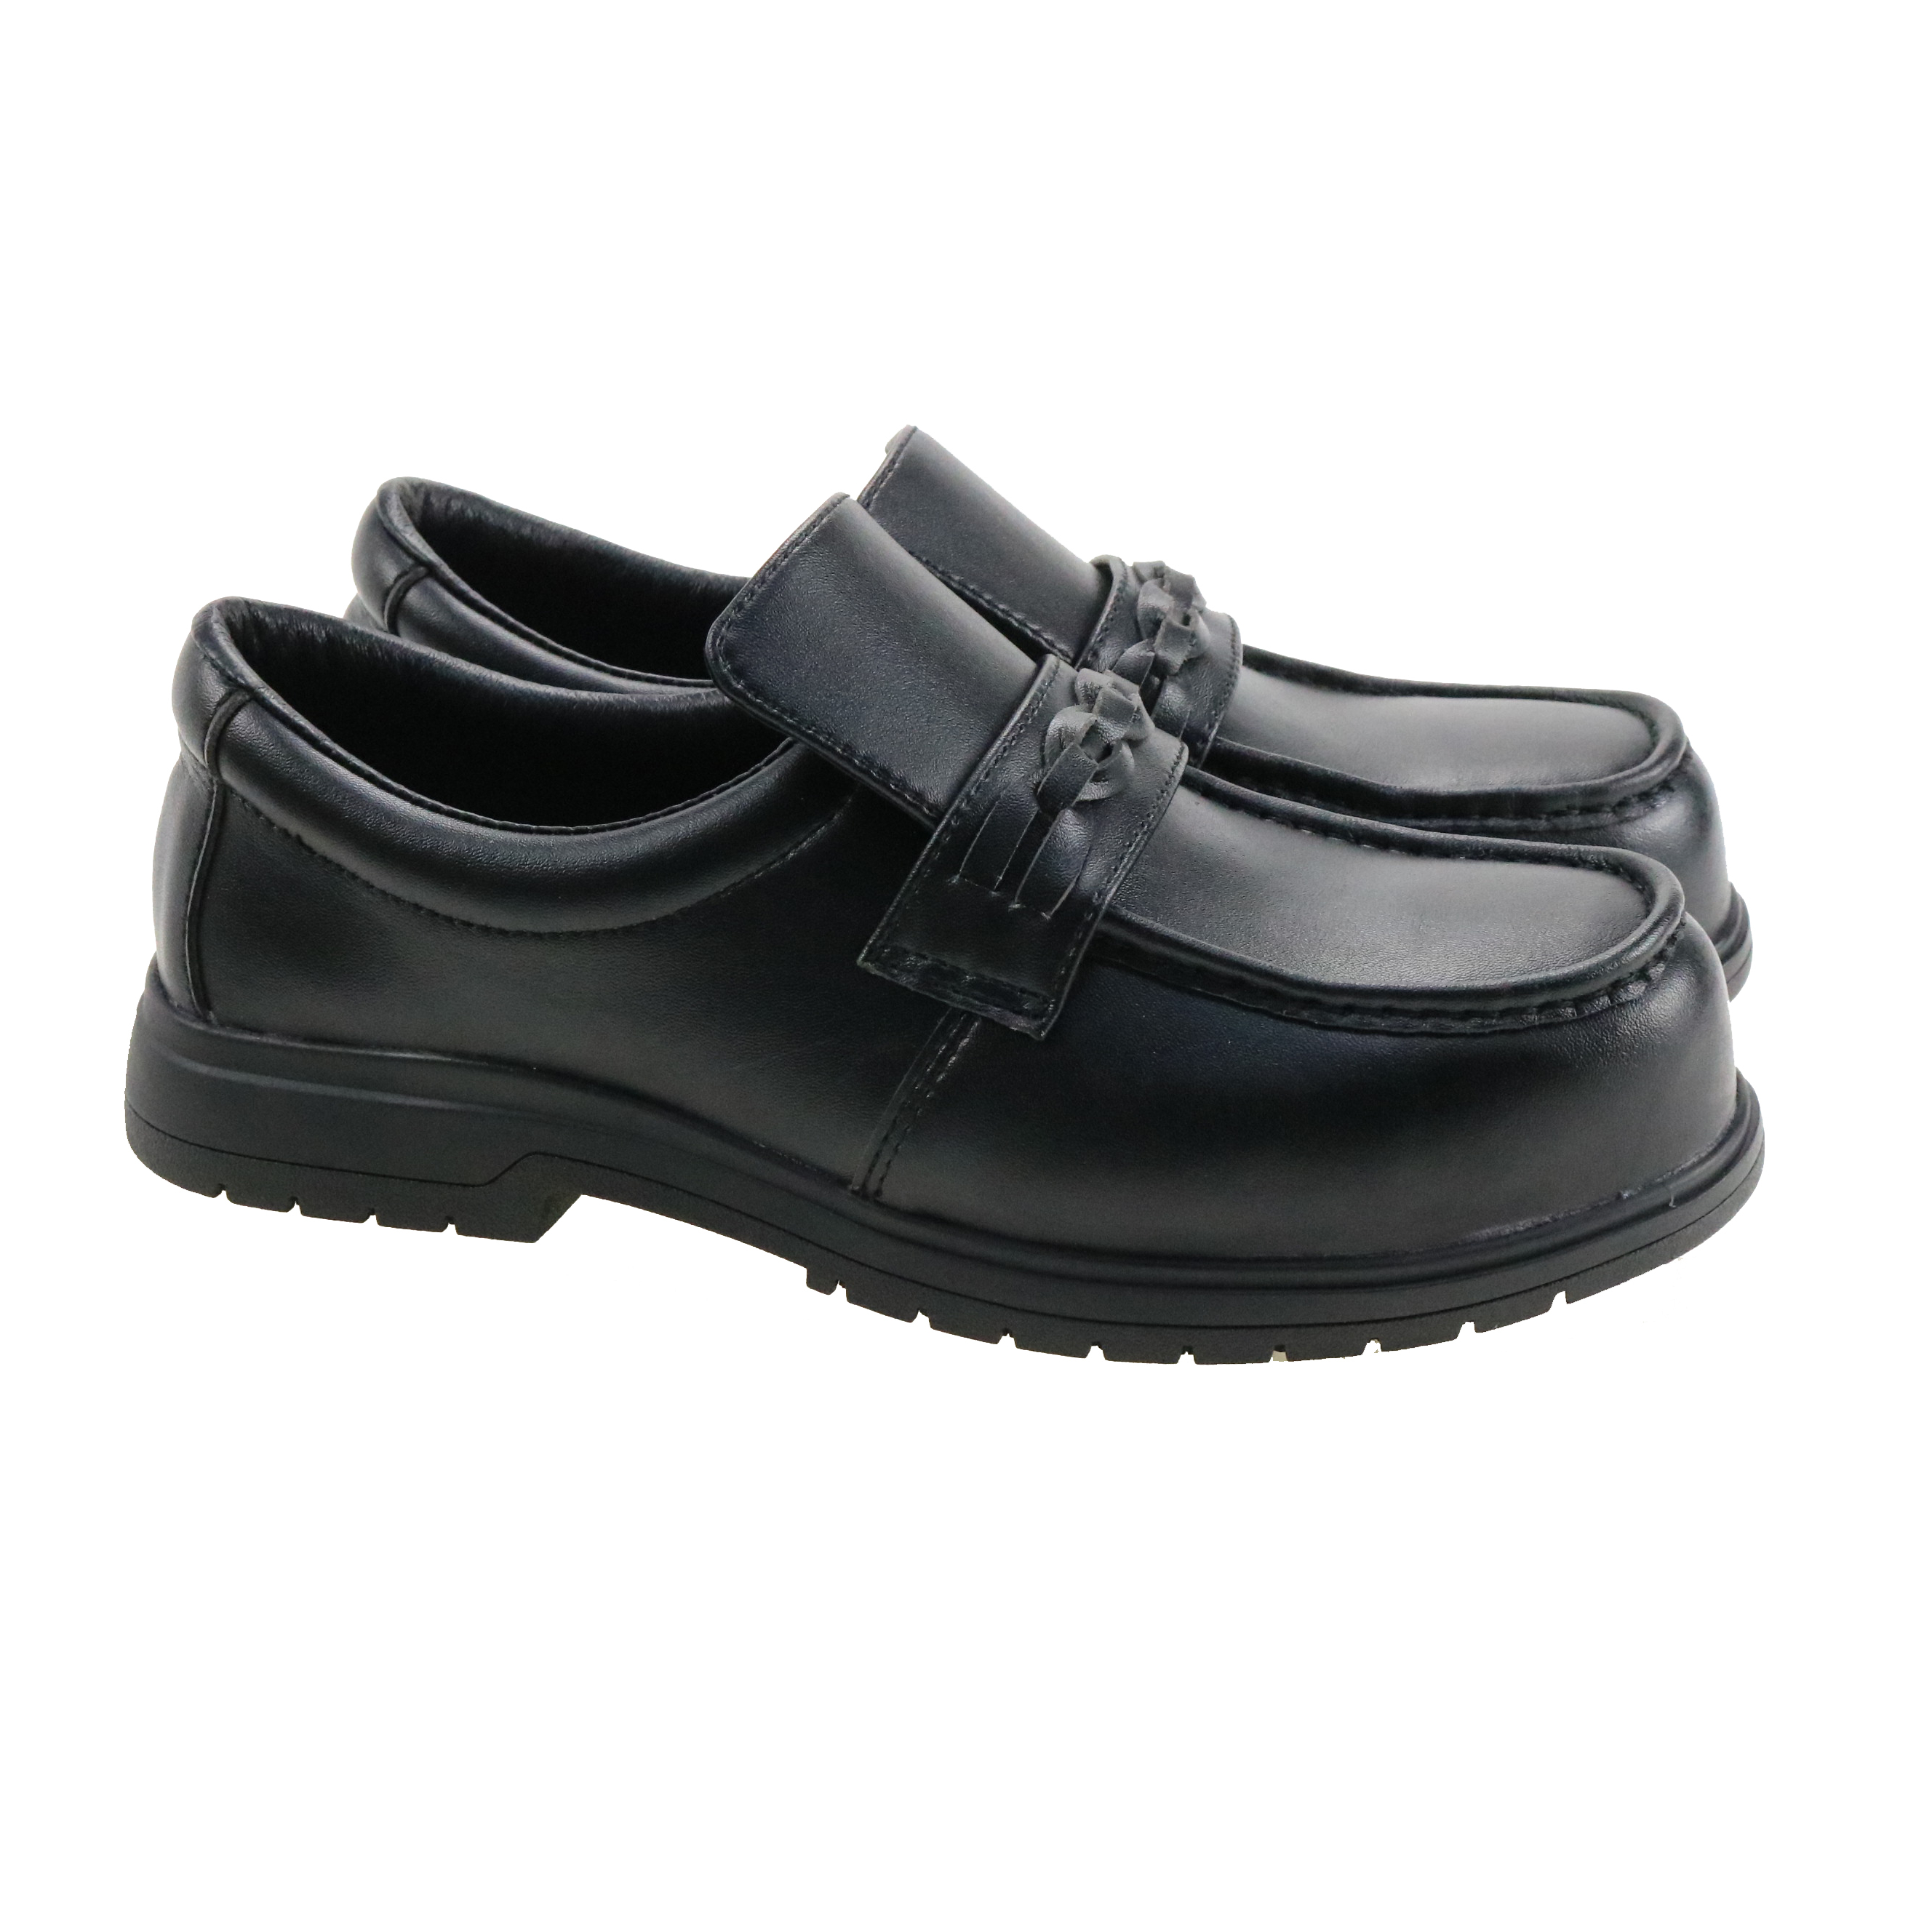 New Style Black Genuine Leather  Administrative Office Working Safety Shoes